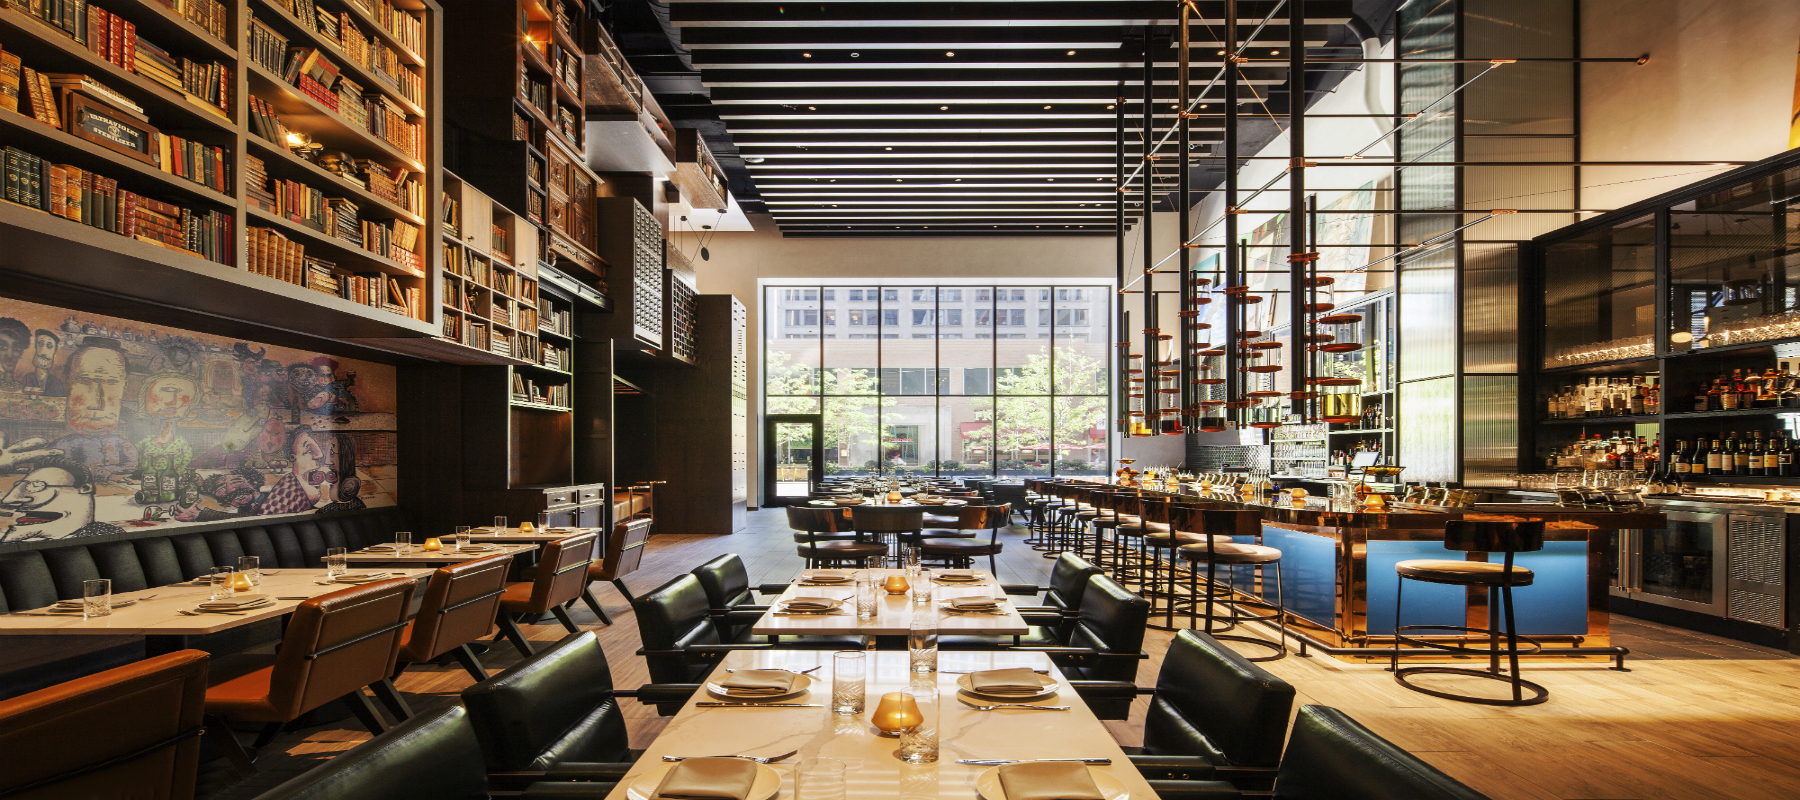 Best Restaurants in Chicago - The Magnificent Mile